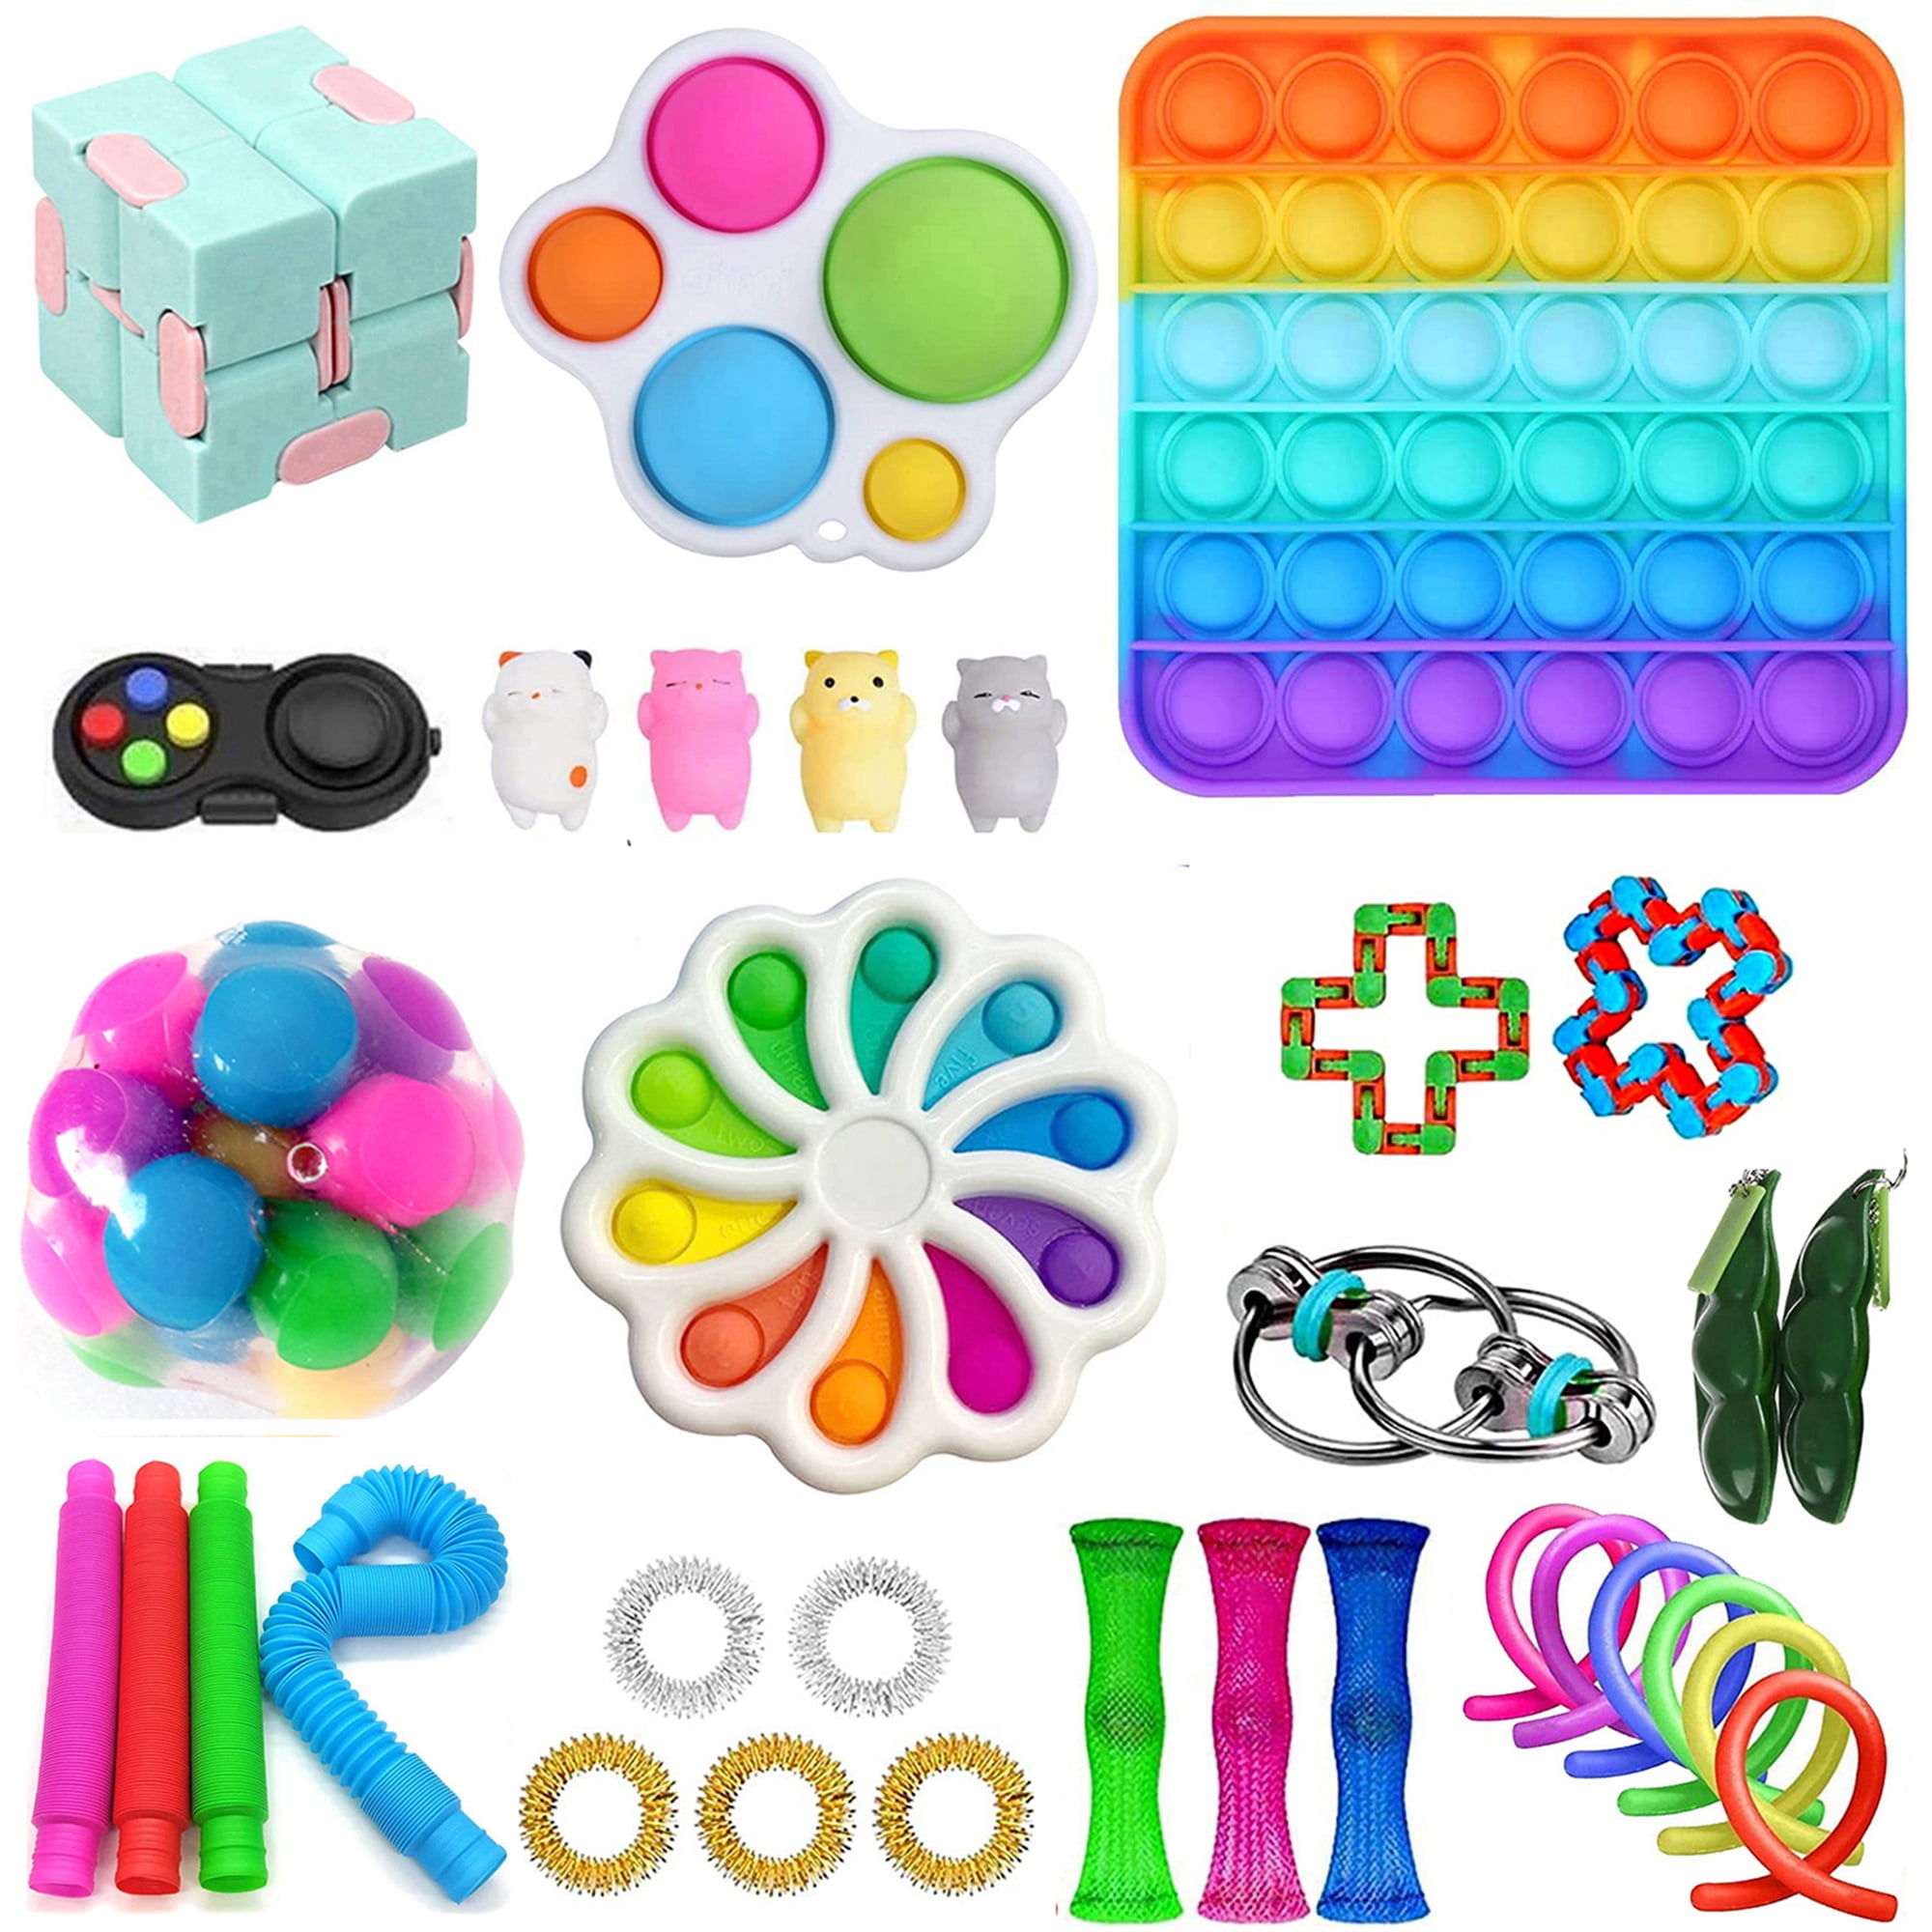 Plus Size Pop Bubble Cheap Fidget Sensory Toy Pack with Pop Anxiety Tube and Single Dimples Fidget Blocks Set Big Size Cheap Fidget Packs Anti-Anxiety Tools for Kids Big Fidget Pack #T